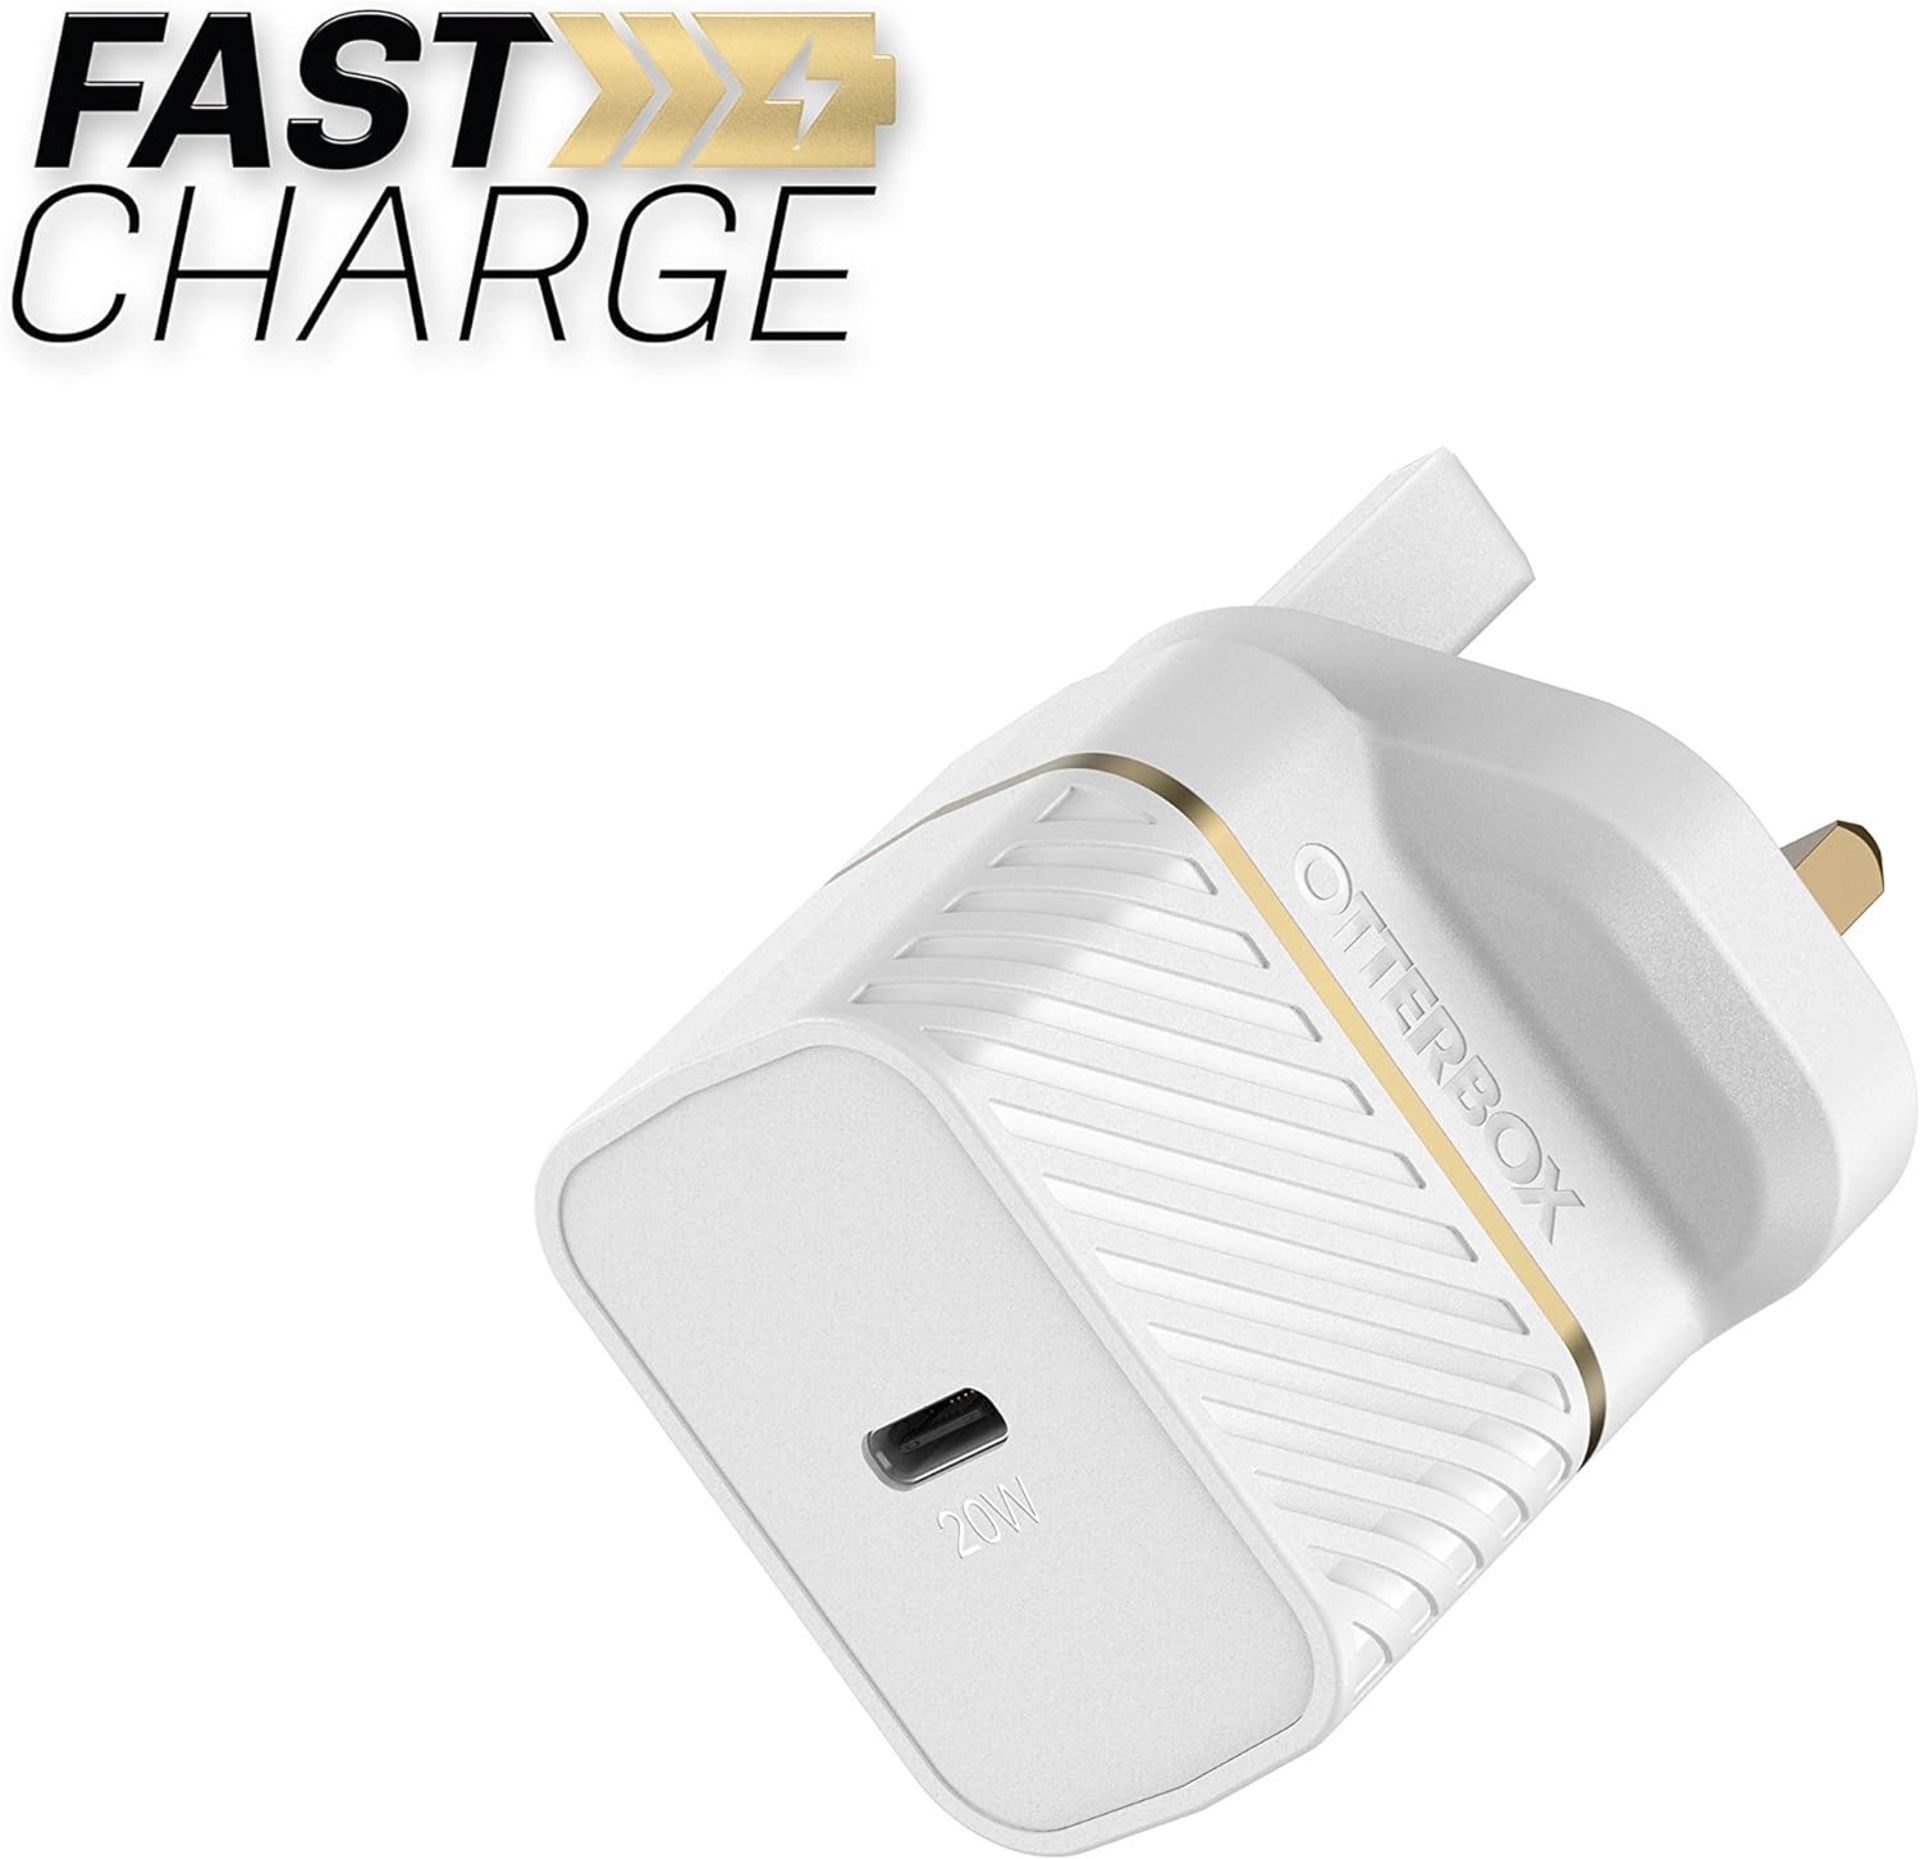 6x NEW & BOXED OTTER BOX 20w Fast Charger. RRP £24.99 EACH. OtterBox Premium Fast Charge Wall - Image 2 of 4